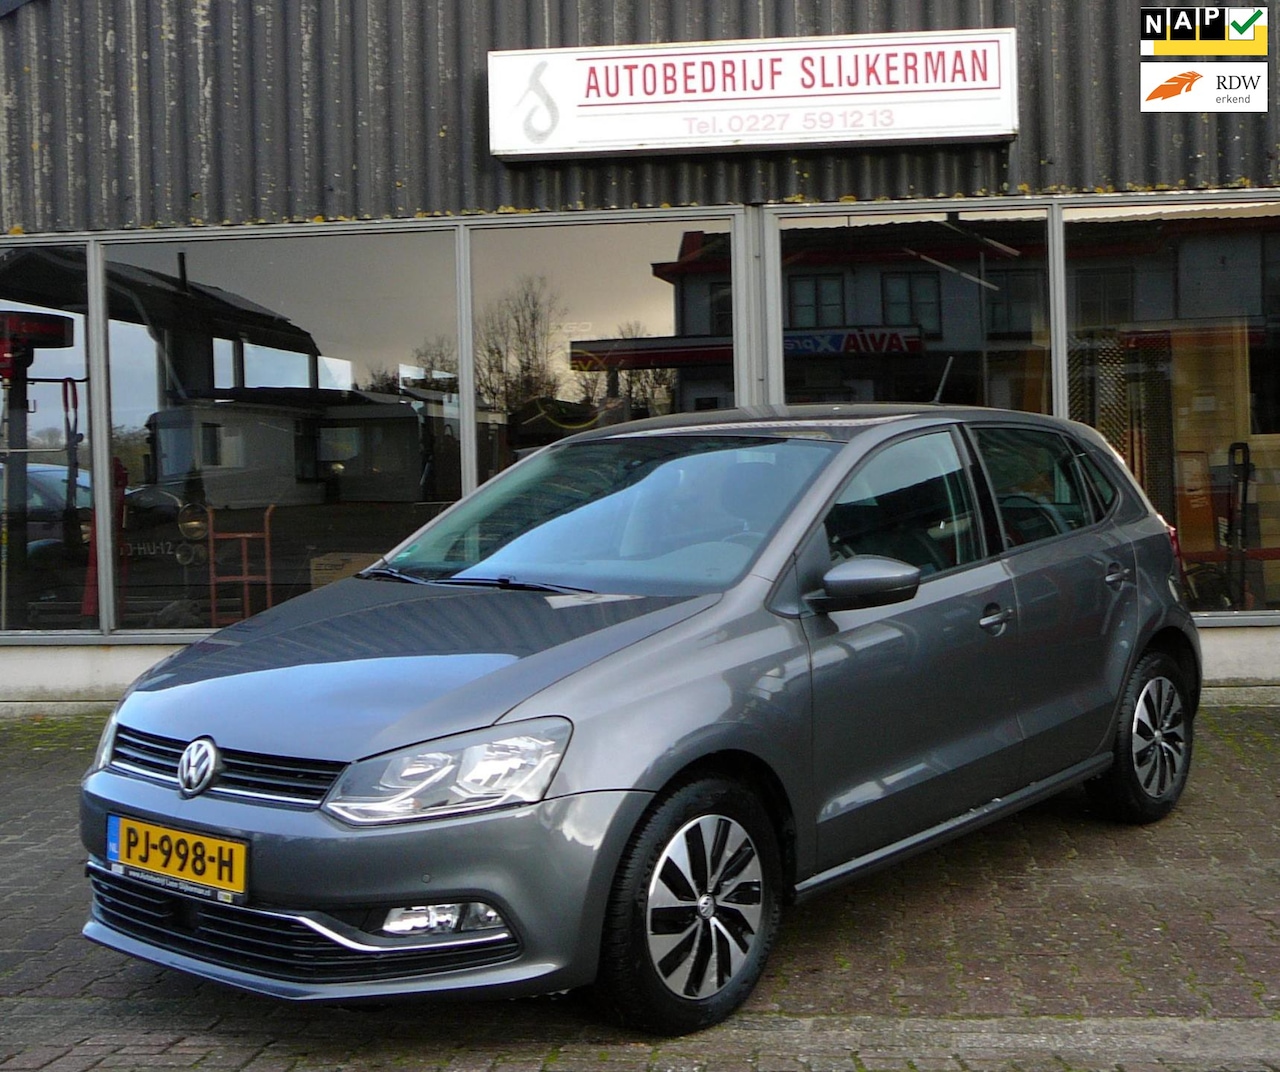 dood Neuken Productie volkswagen polo diesel automaat used – Search for your used car on the  parking